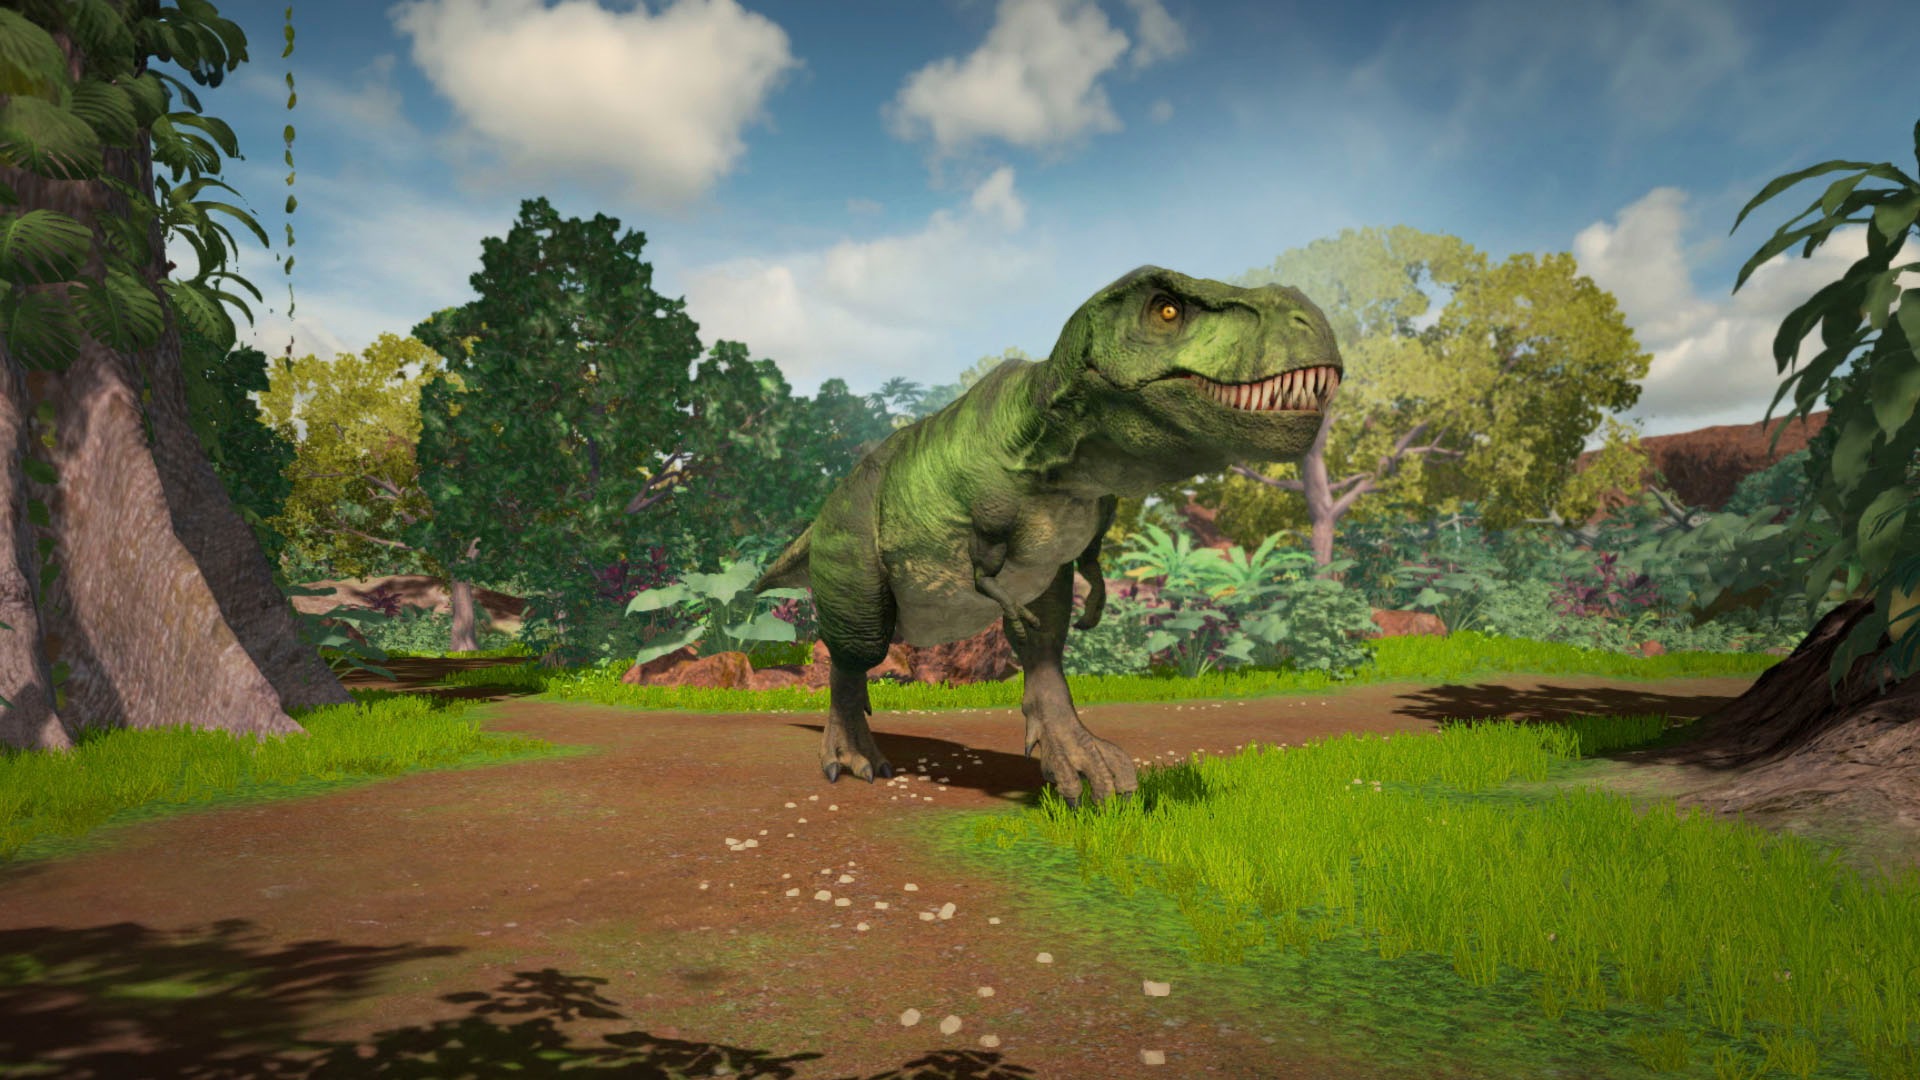 Software Pyramide Spielesoftware »Dinosaurs: Mission Dino Camp«, PlayStation 4